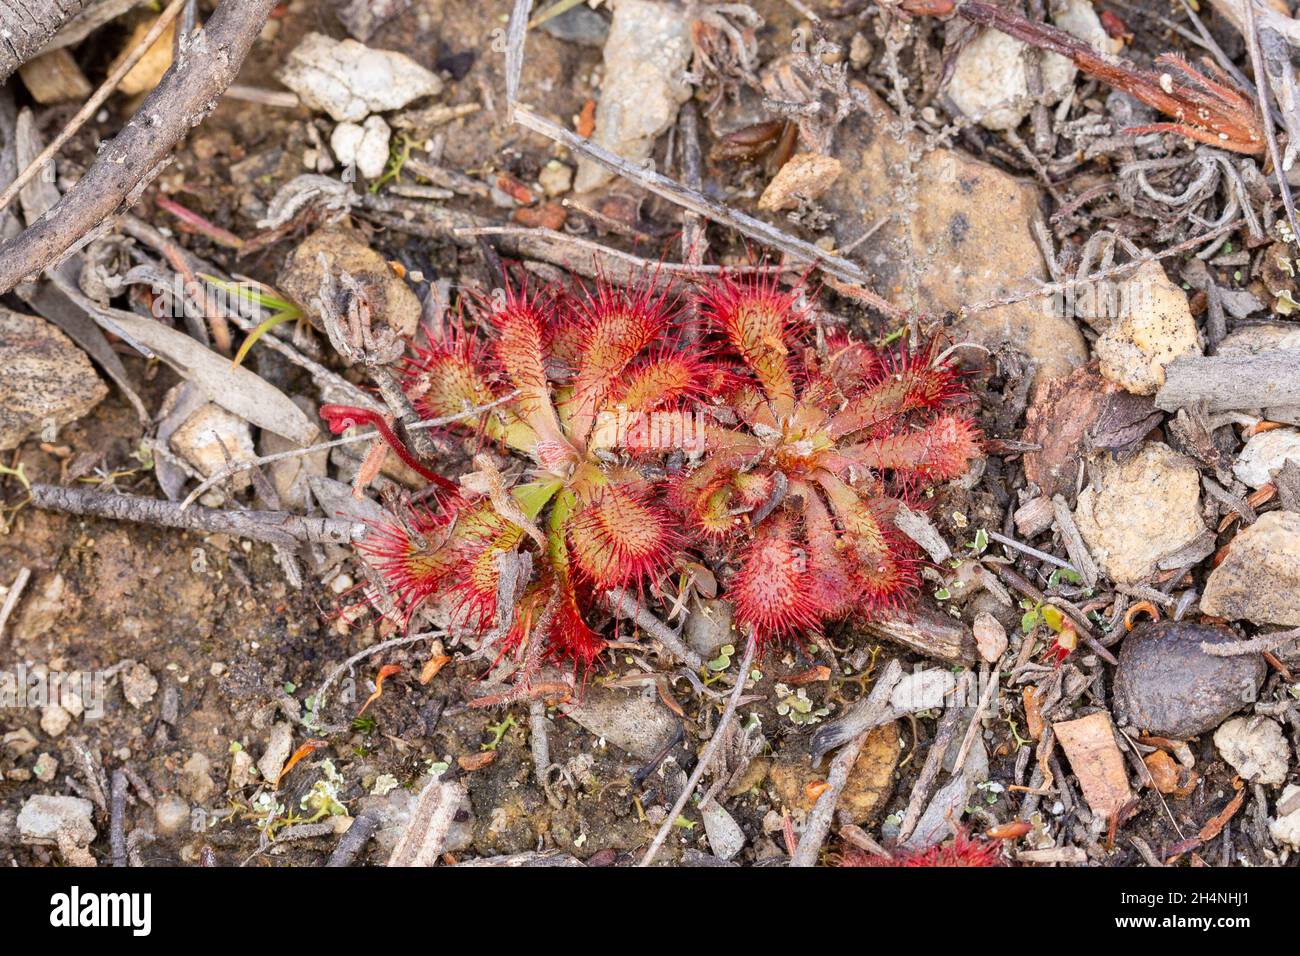 Two Rosettes of a Sundew species (Drosera), a carnivorous plant, seen in natural habitat close to Mossel Bay in the Western Cape of South Africa Stock Photo